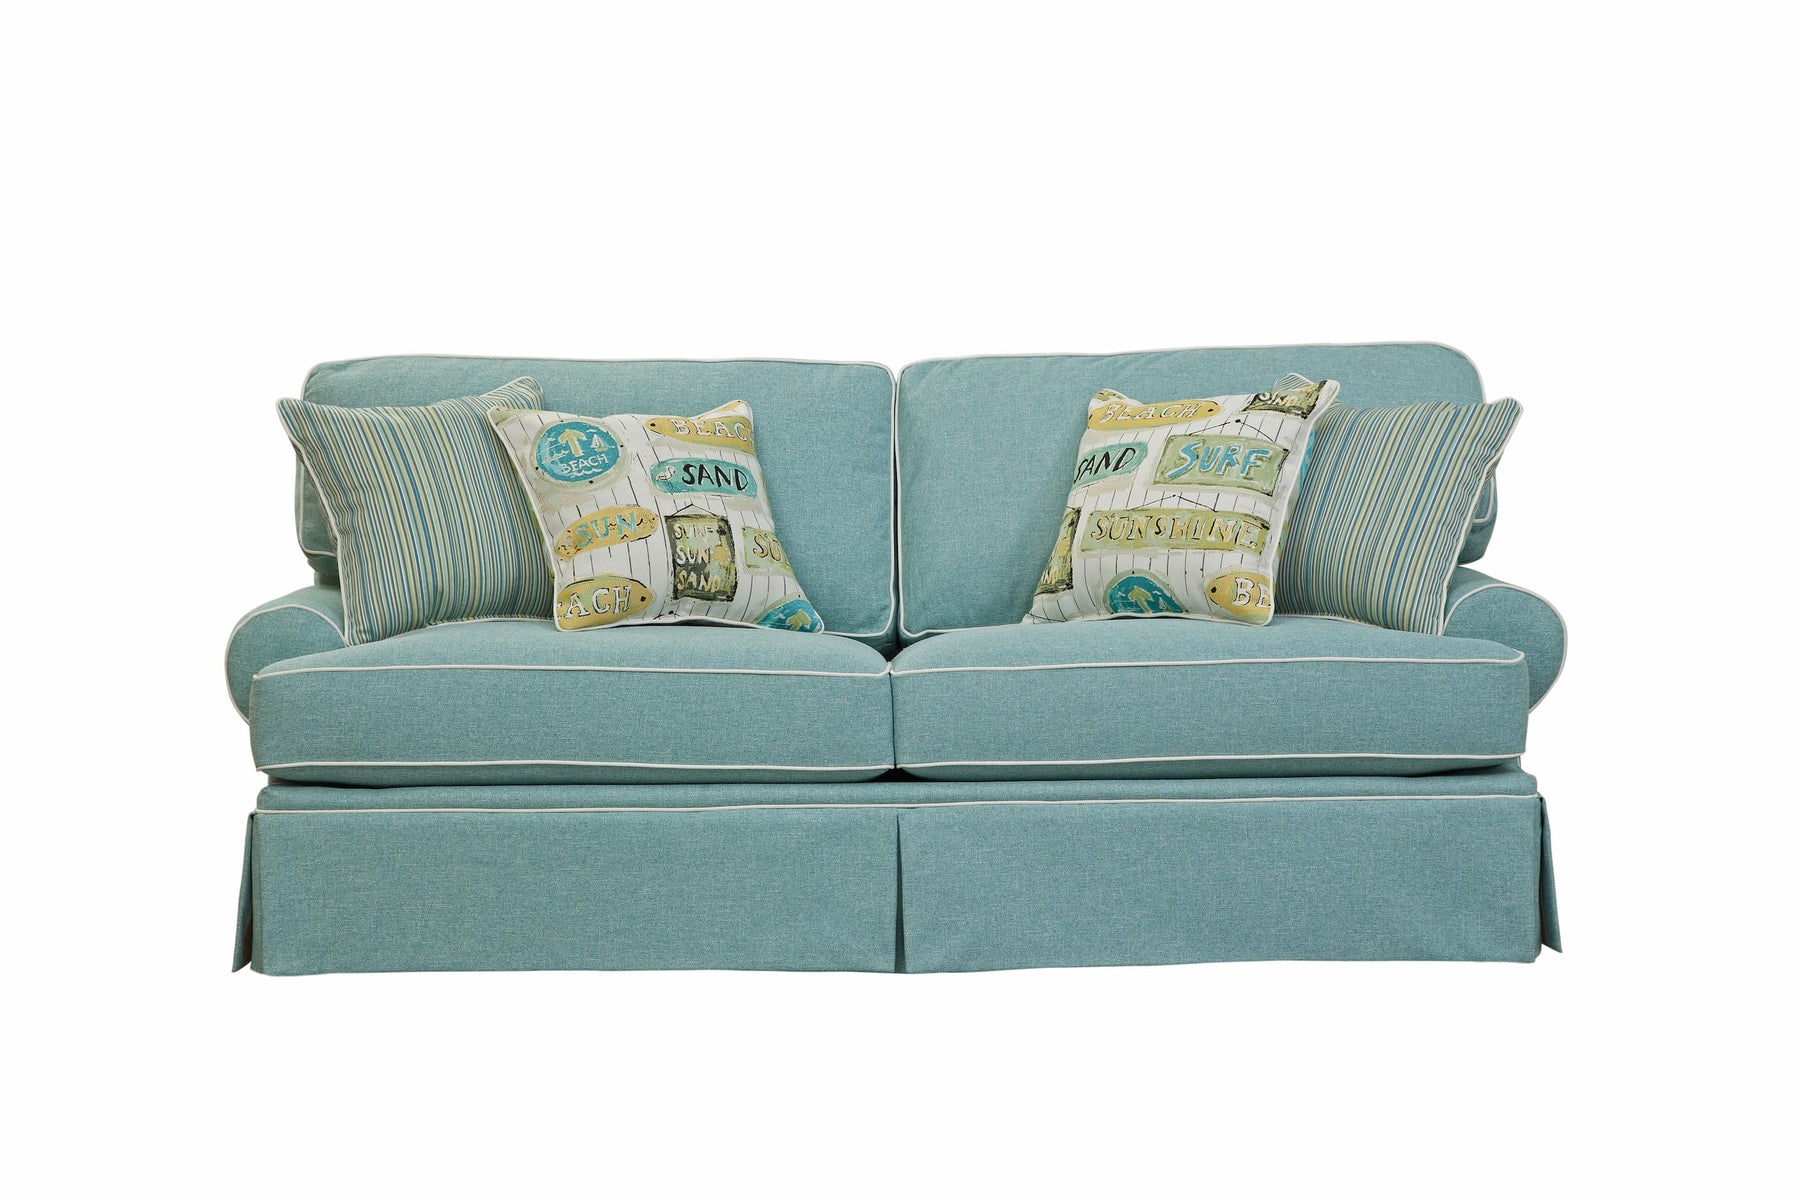 S275A Sofa, Loveseat and Chair Set